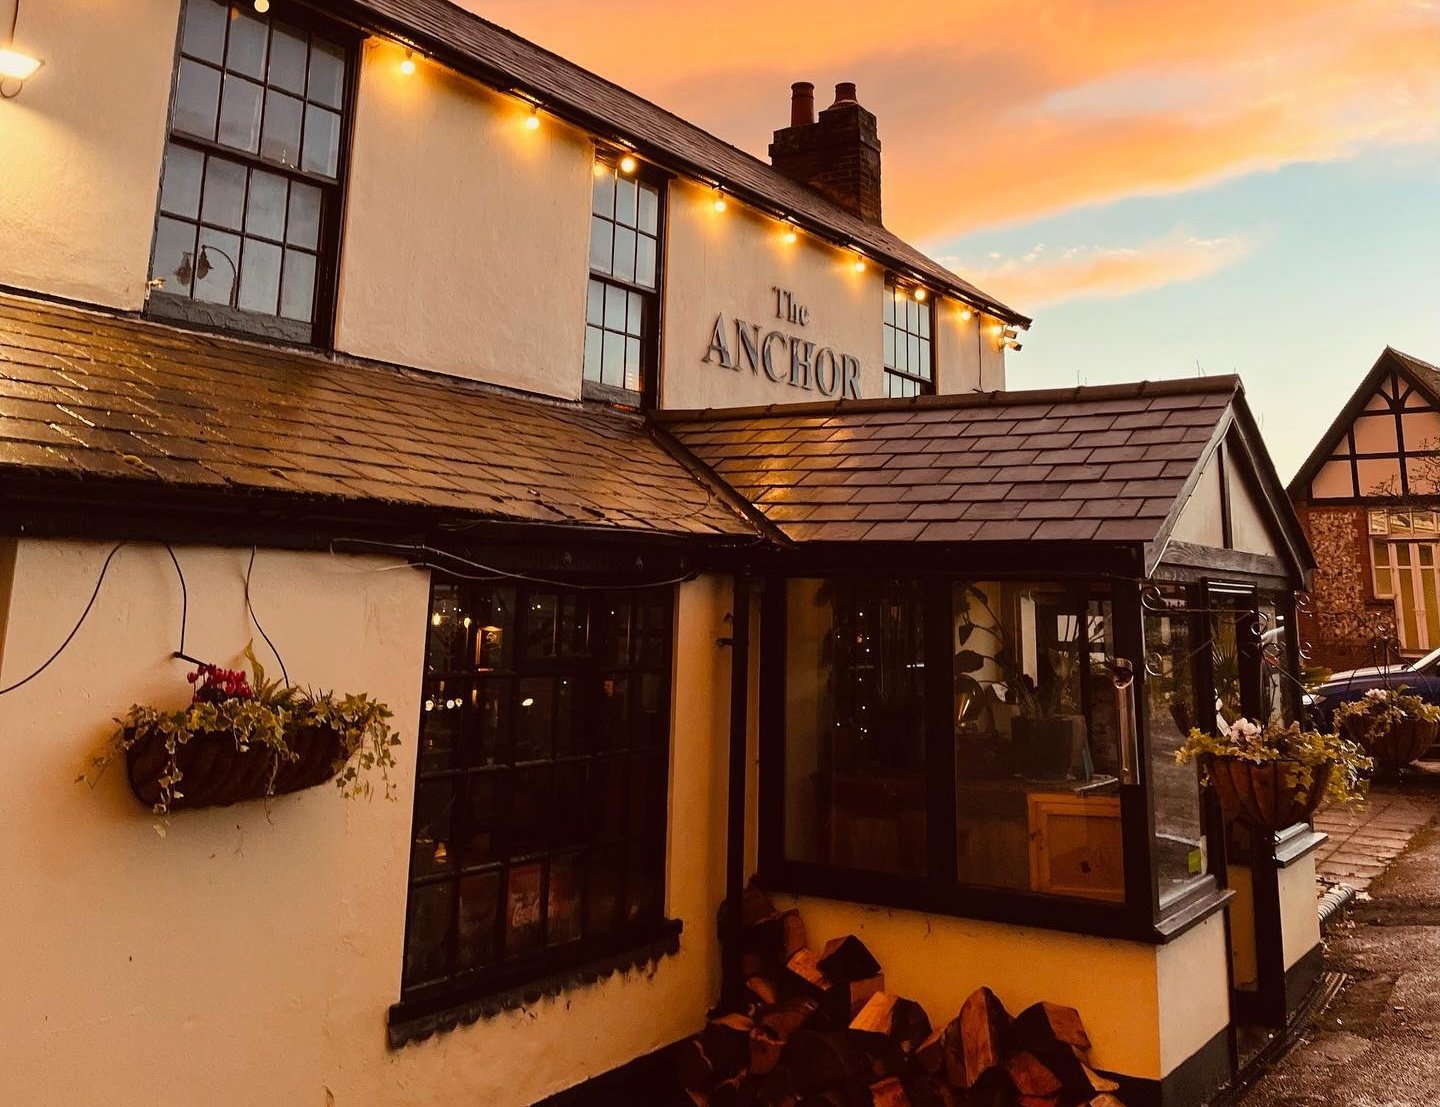 The Anchor - the best fish and chips in England